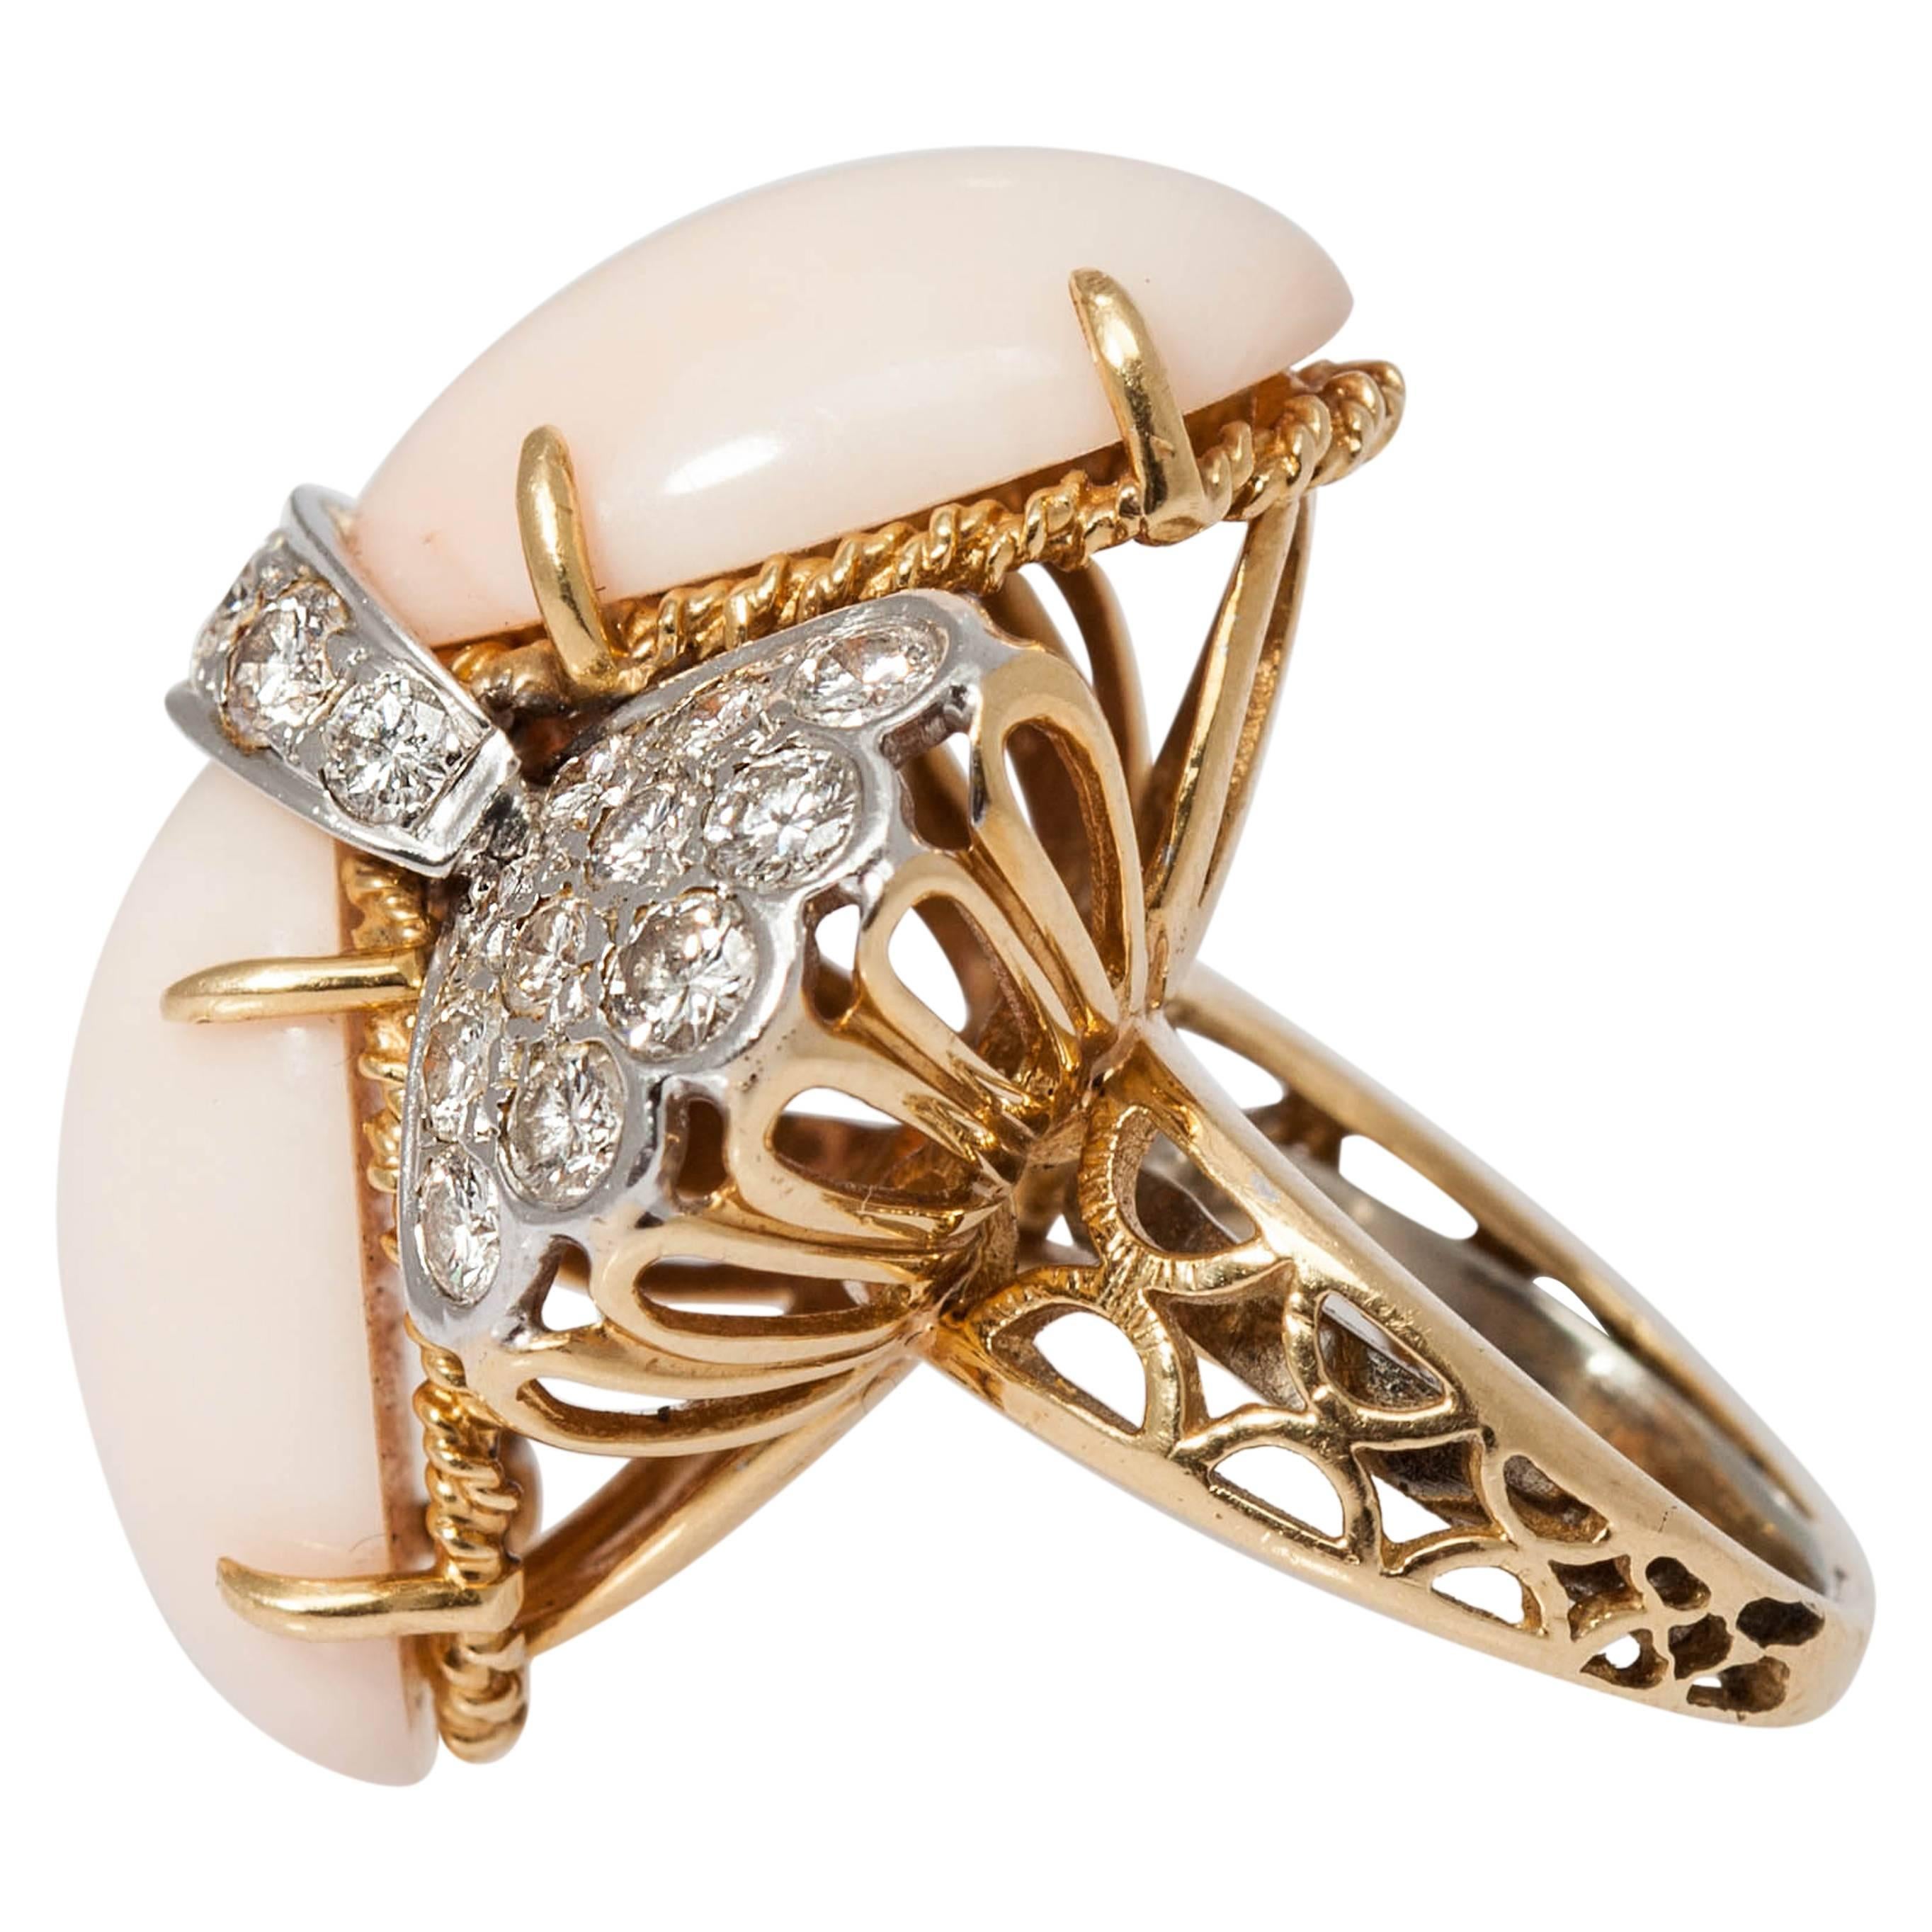 A sophisticated wing shaped cocktail ring, embellished with fine brilliant cut diamonds and two oval light coral elements. Mounted on 18kt yellow and white gold. Circa 1960. 